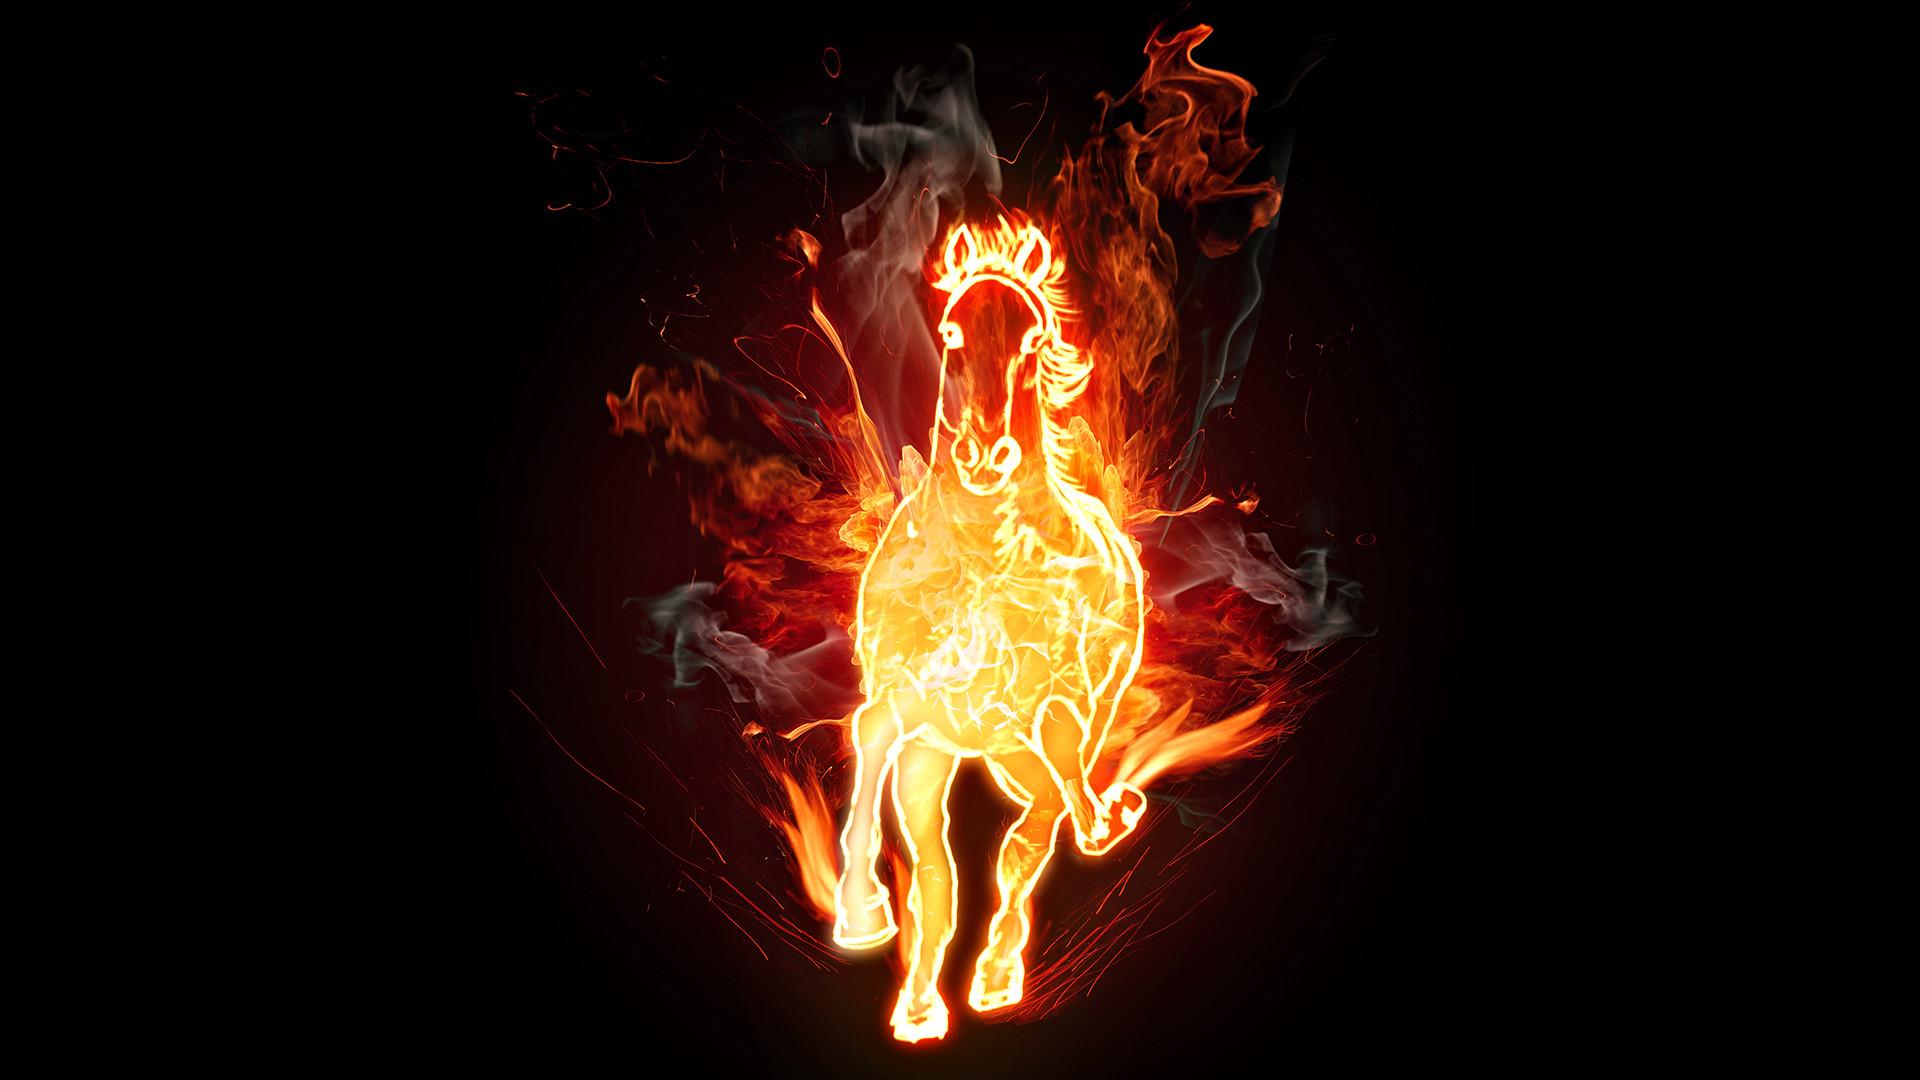 Cool Flame Background